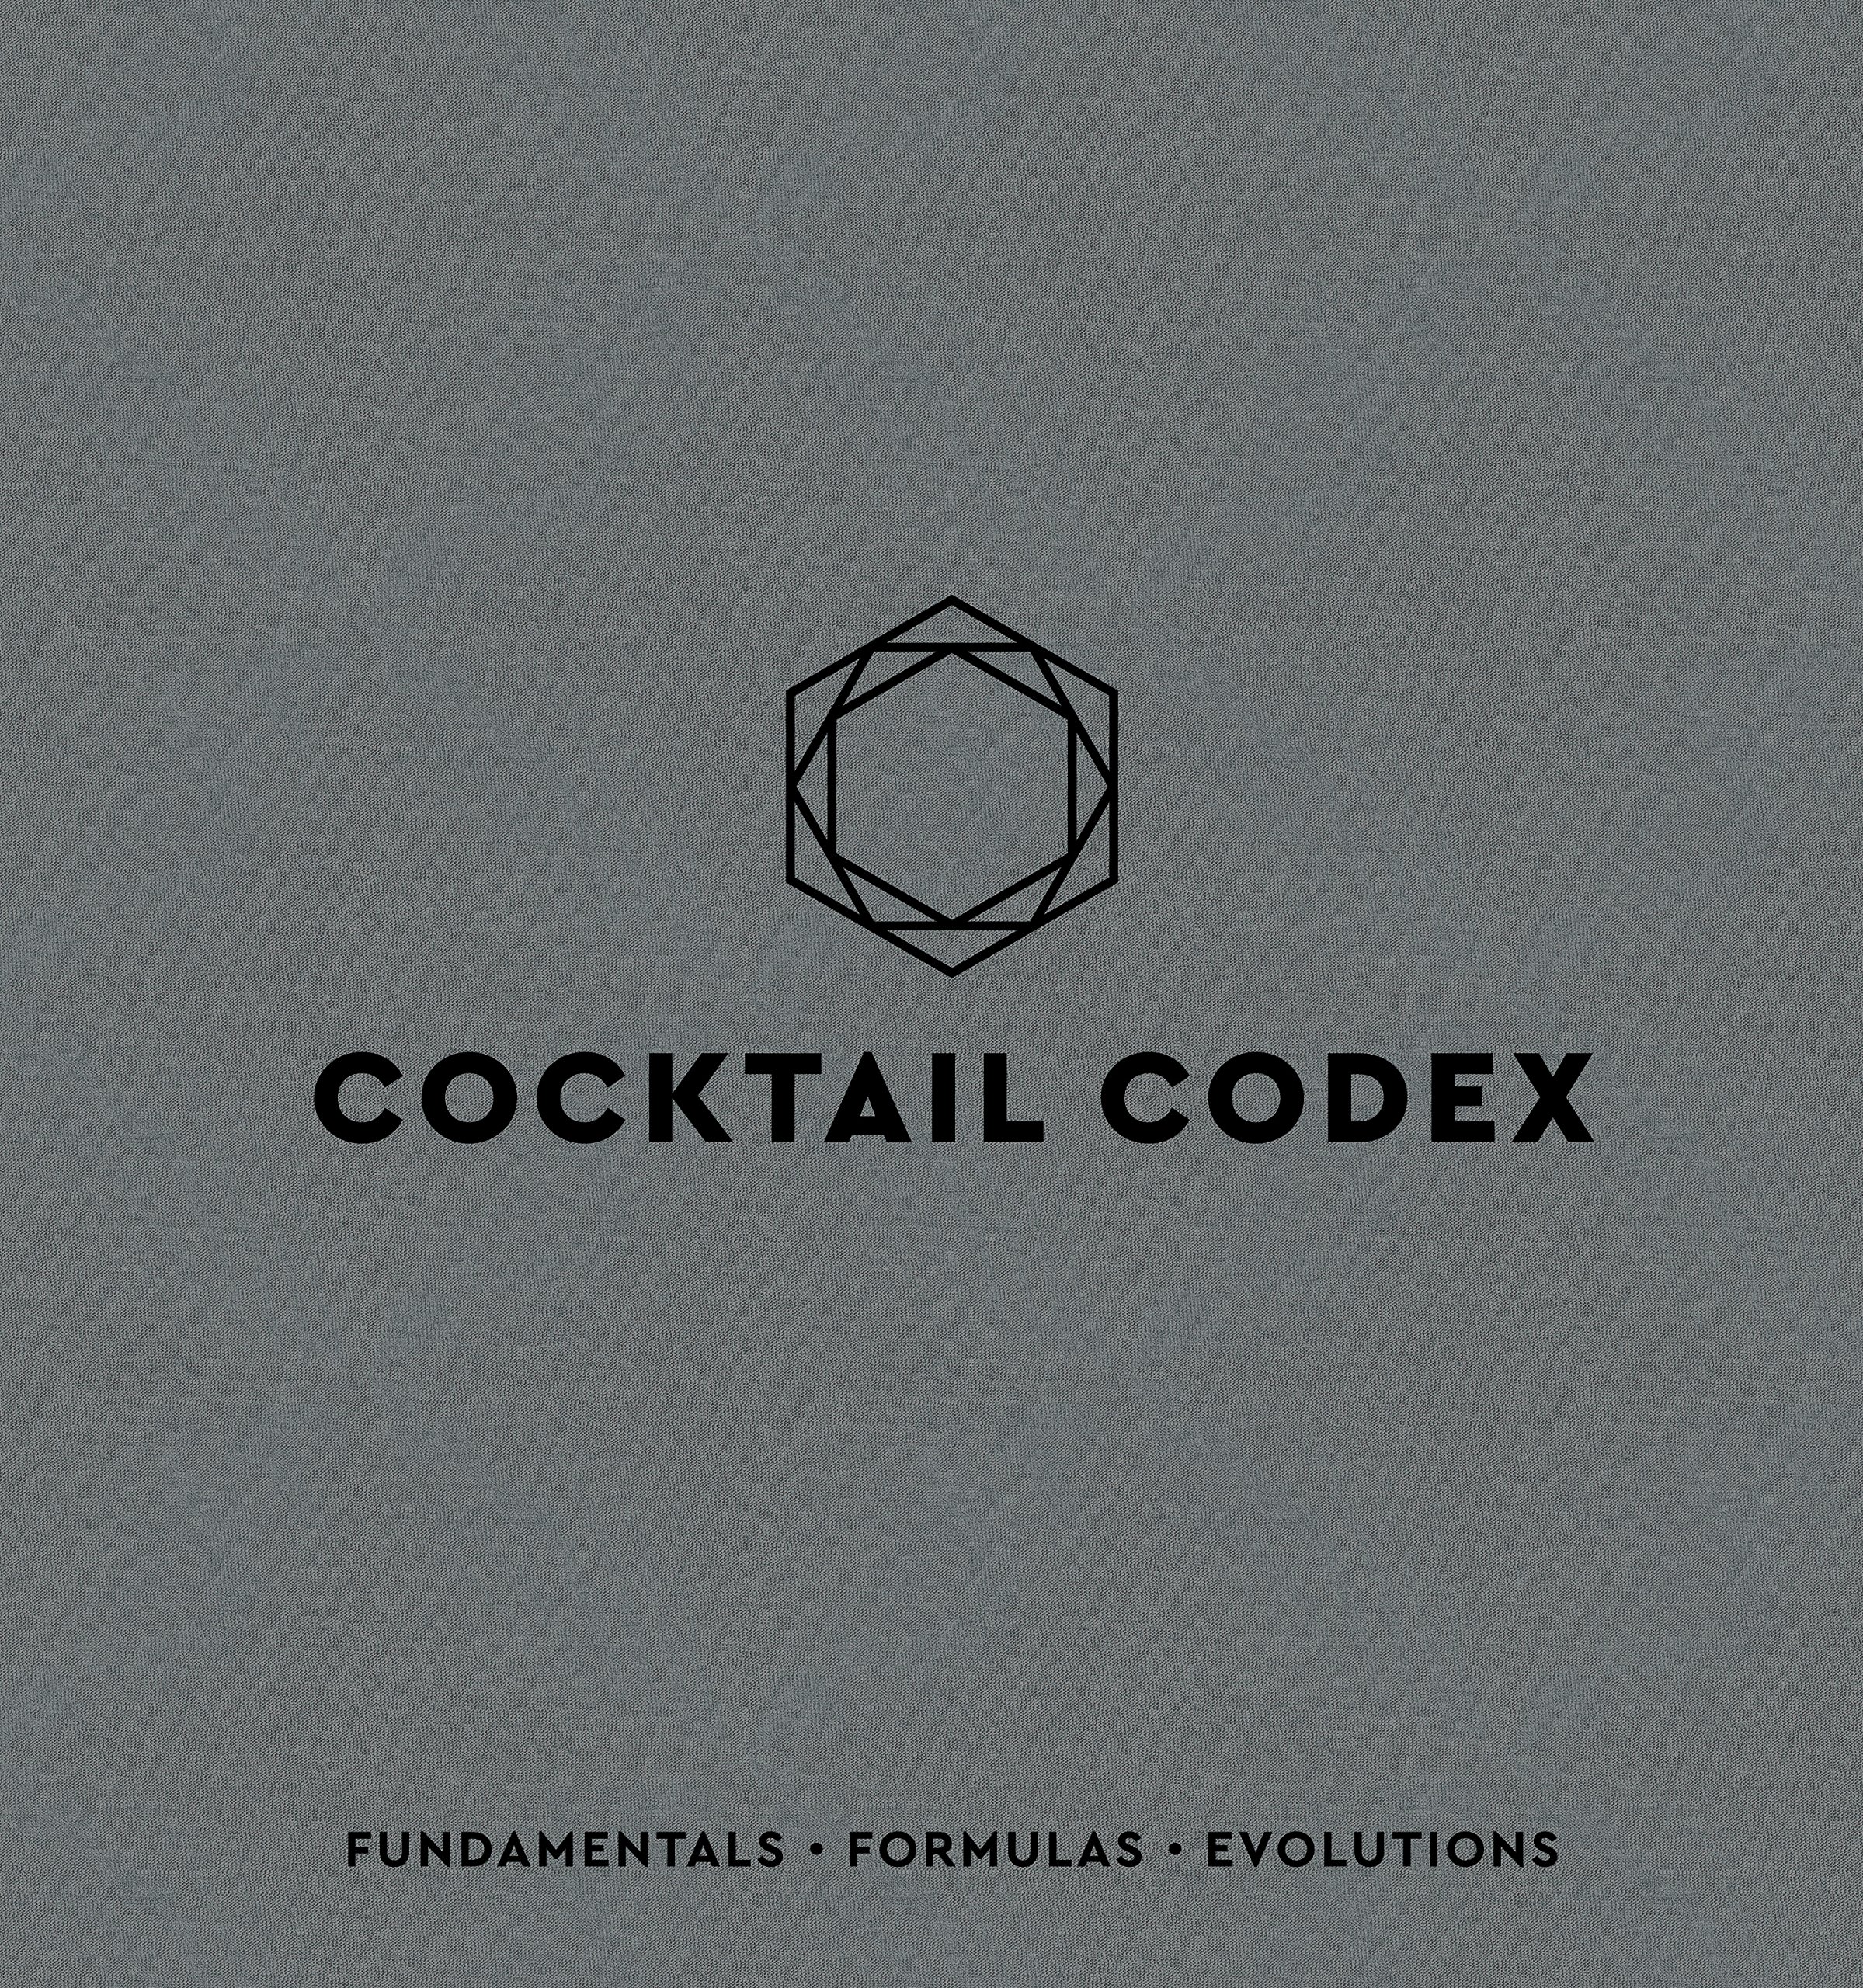 'Cocktail Codex' by Alex Day